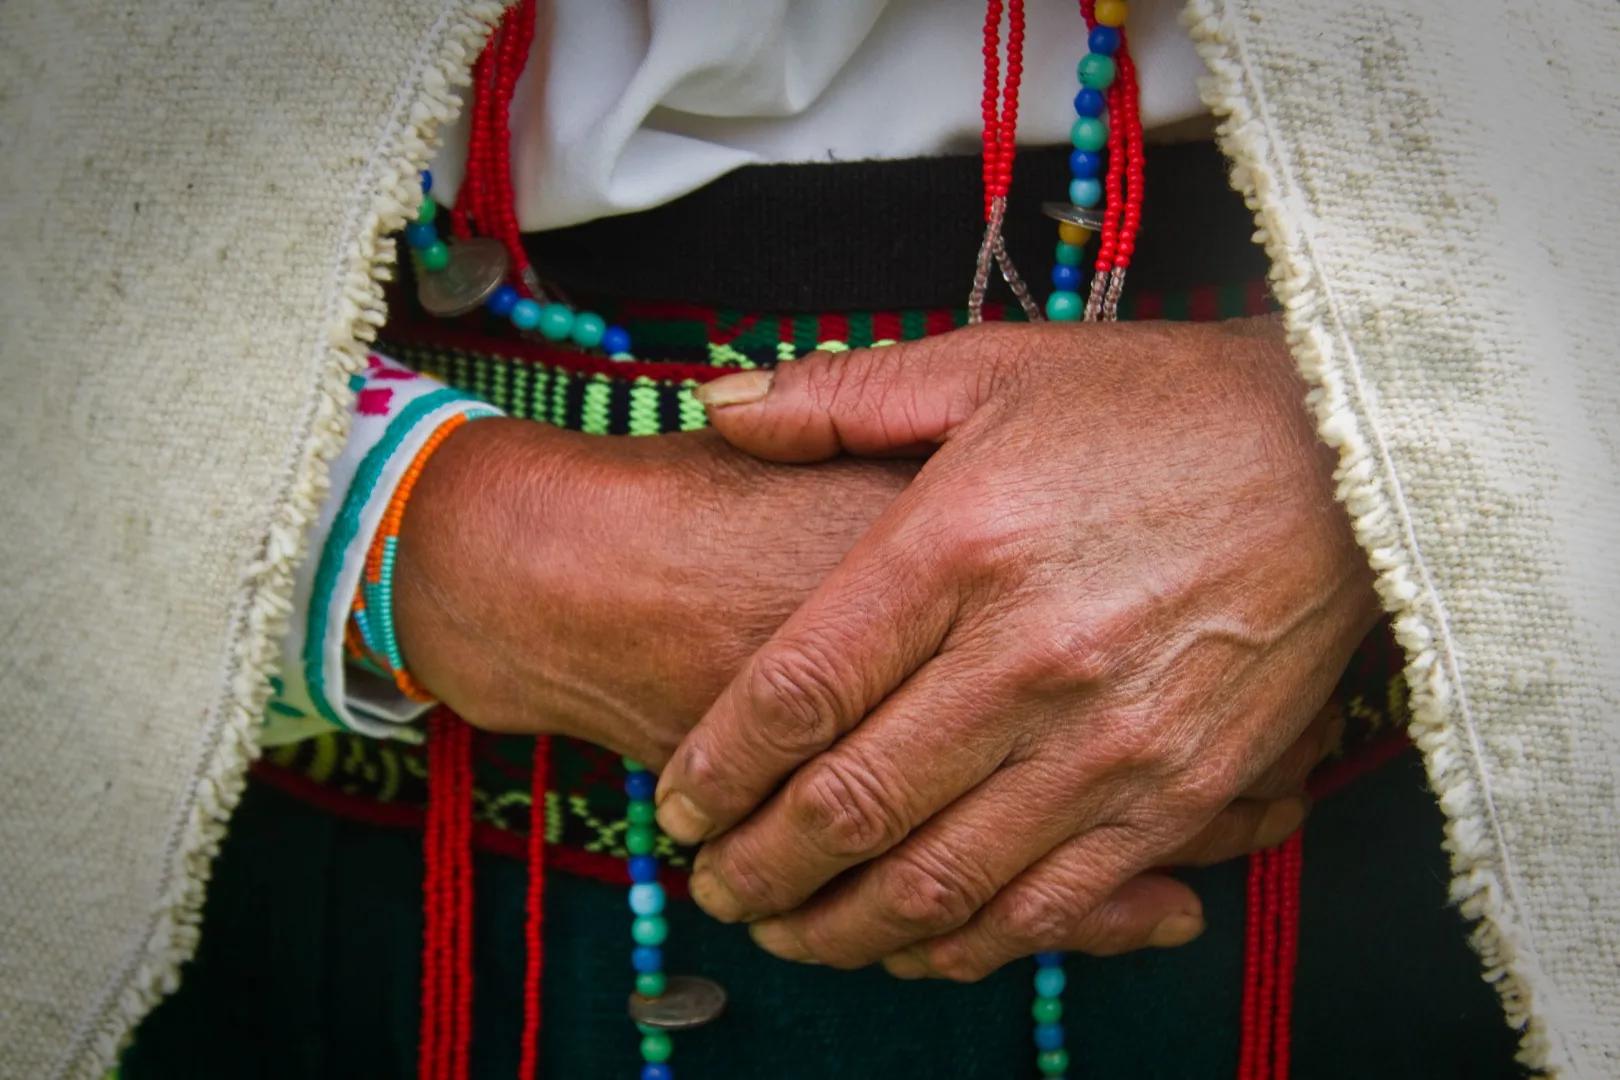 Can Ecuador's indigenous population awaken in time to save their country's sovereignty from globalism?